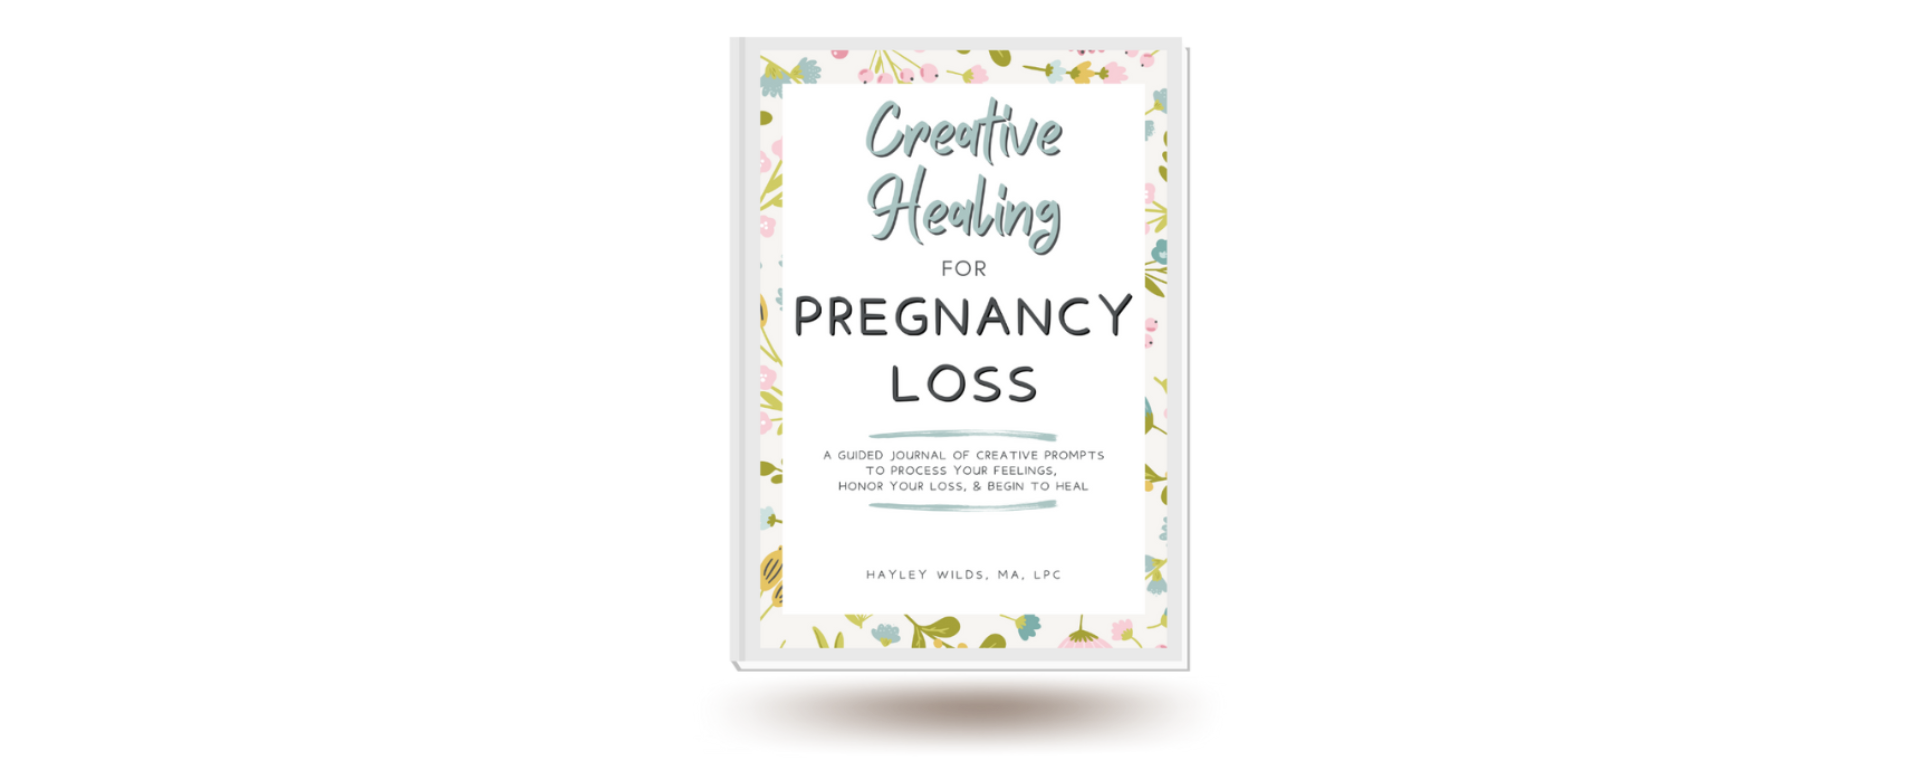 pregnancy loss guided journal image